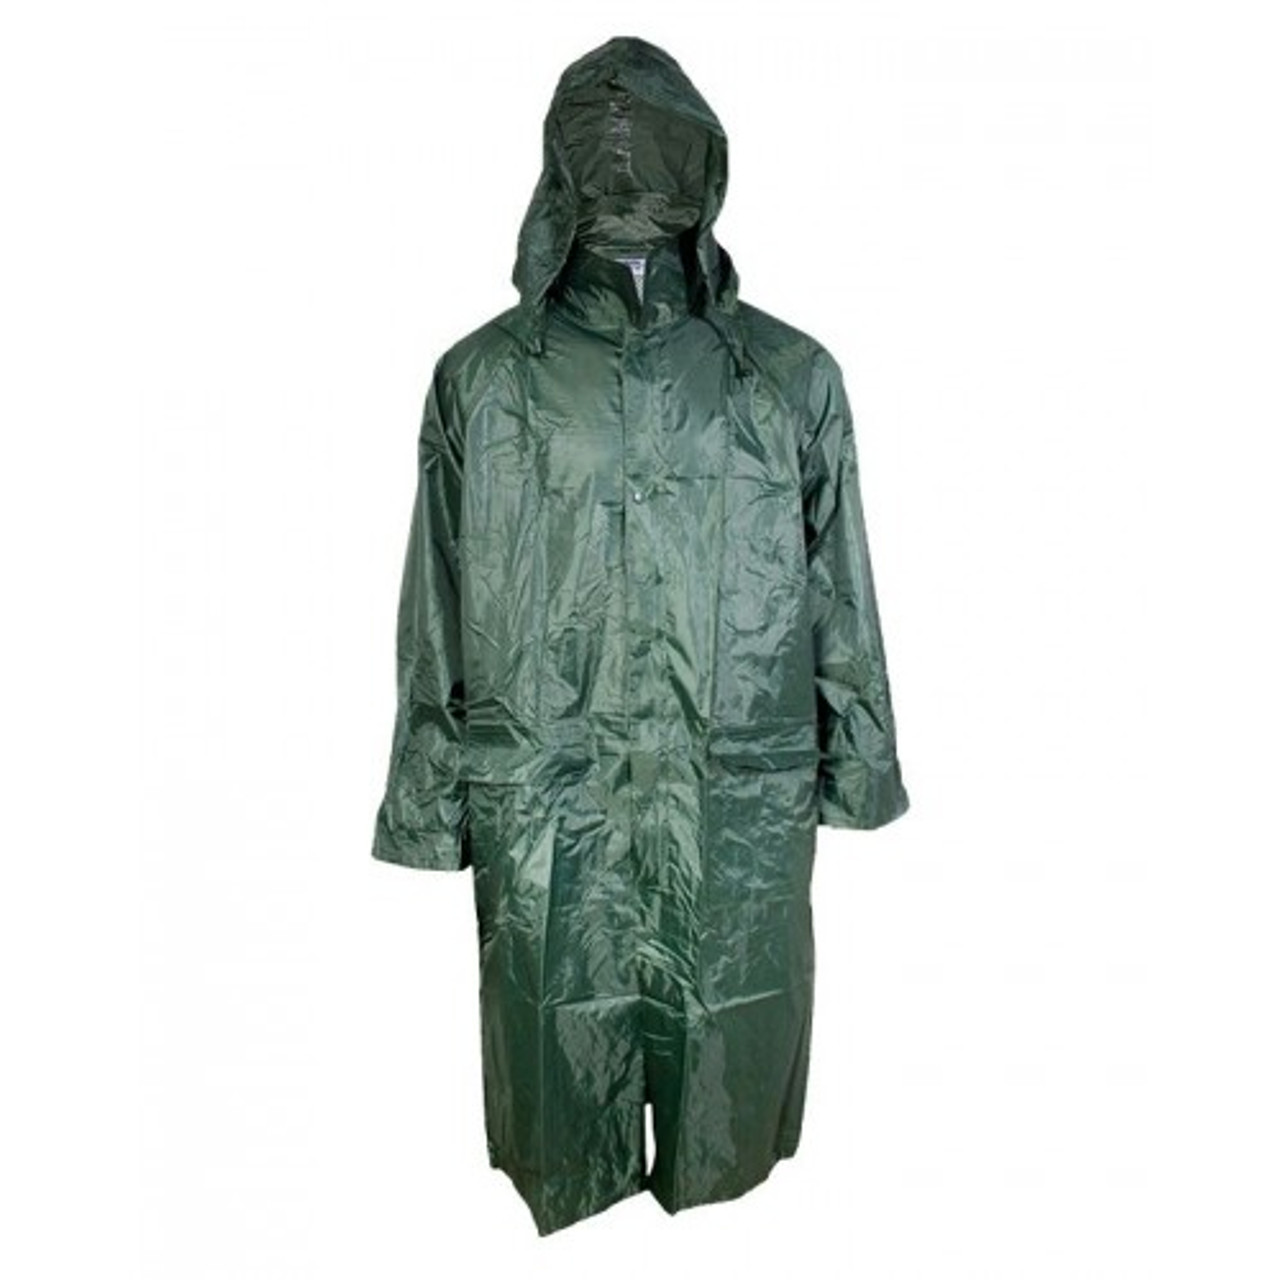 Buy Online Polyester Raincoat Gown Hellog from GZ Industrial Supplies ...